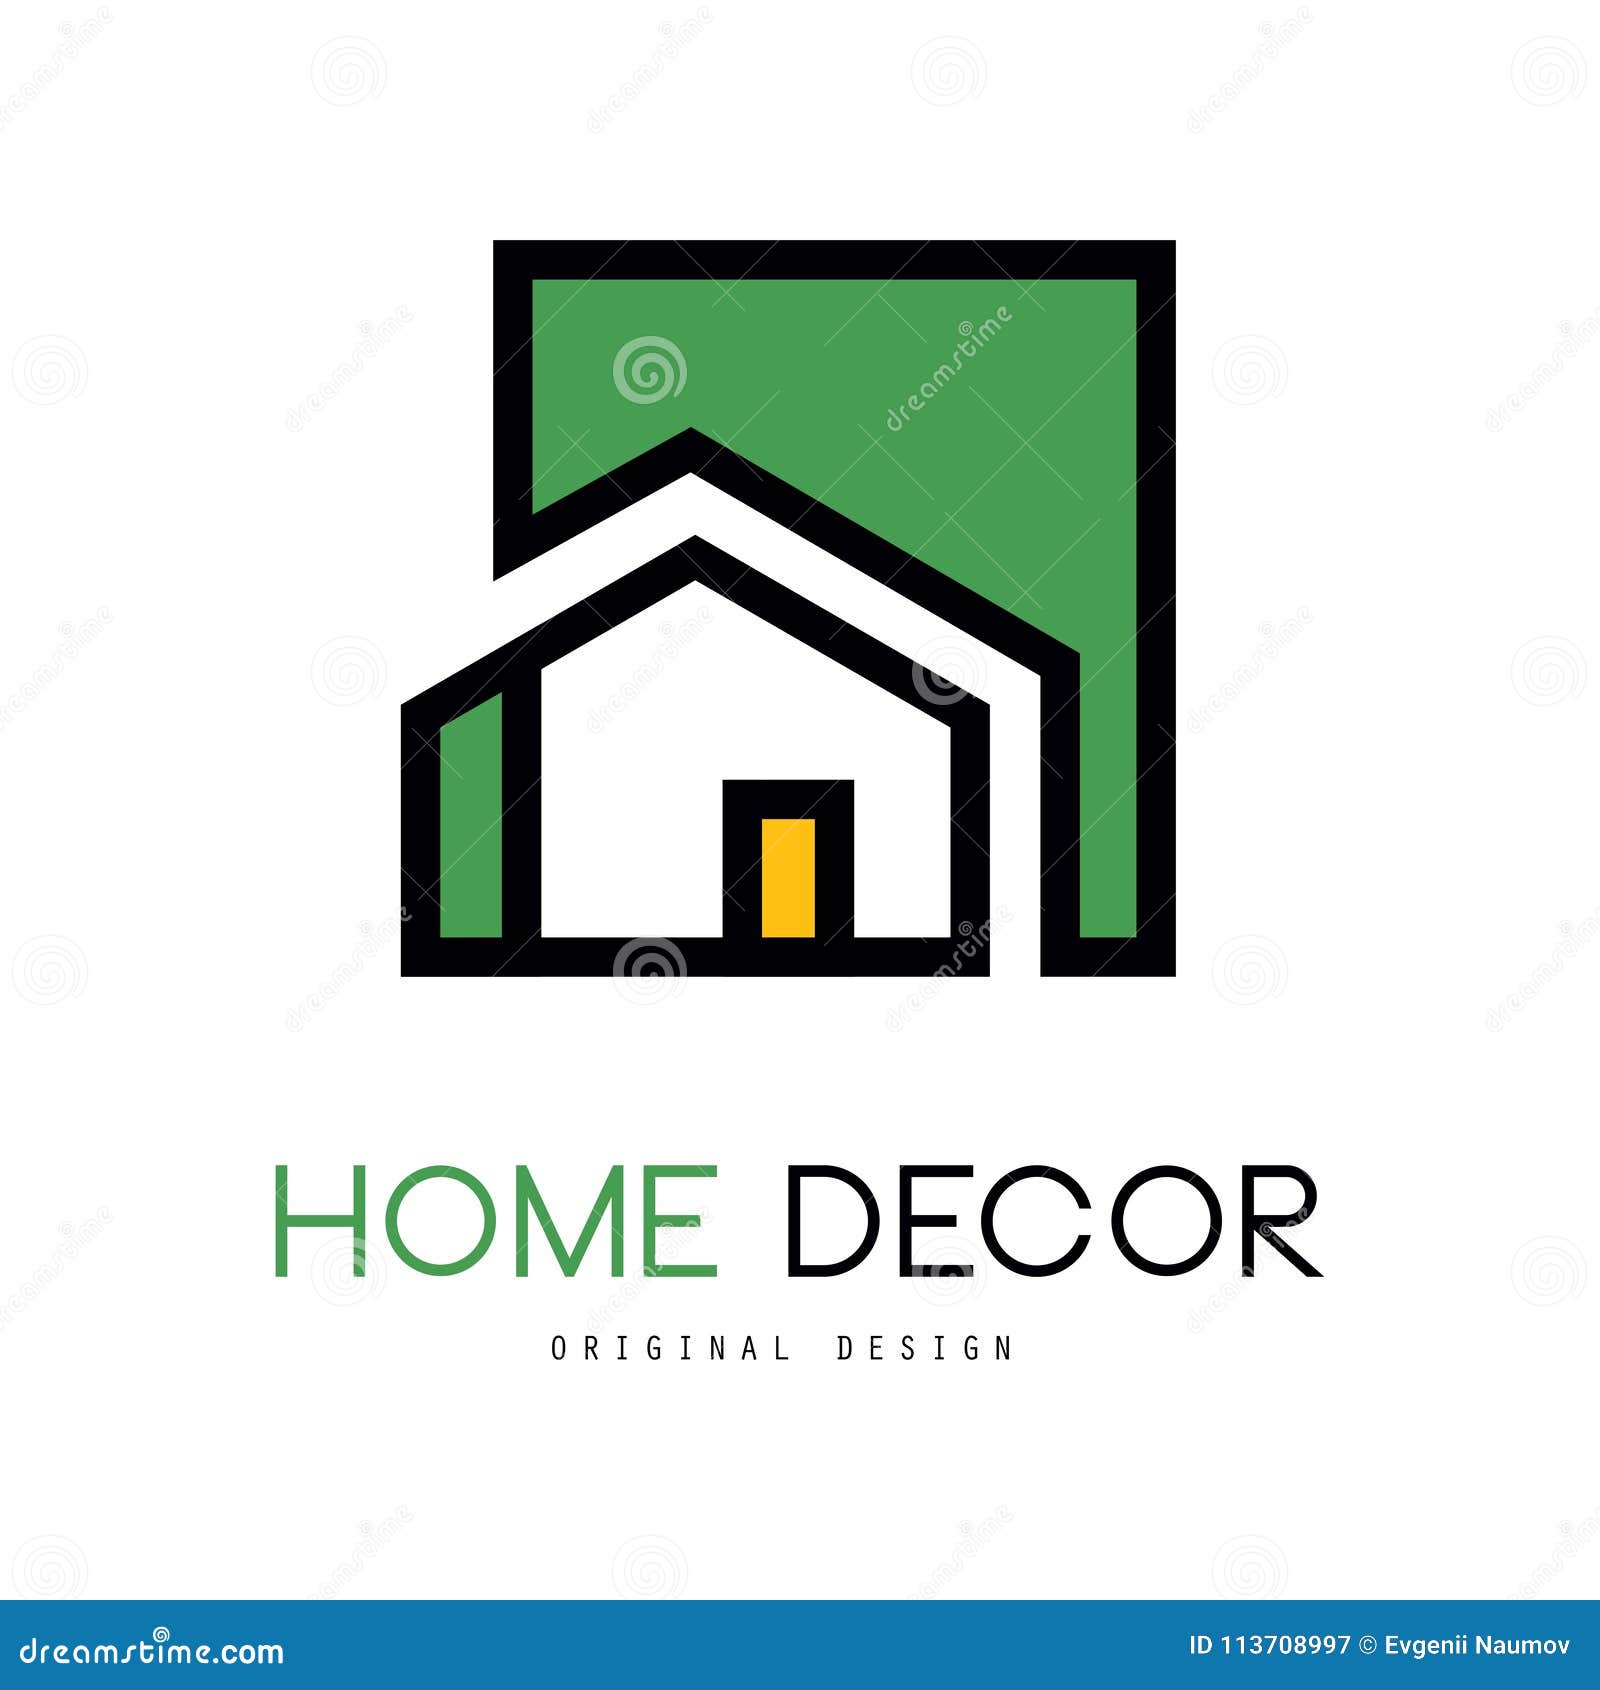 Geometric Vector Logo With Abstract Building Original